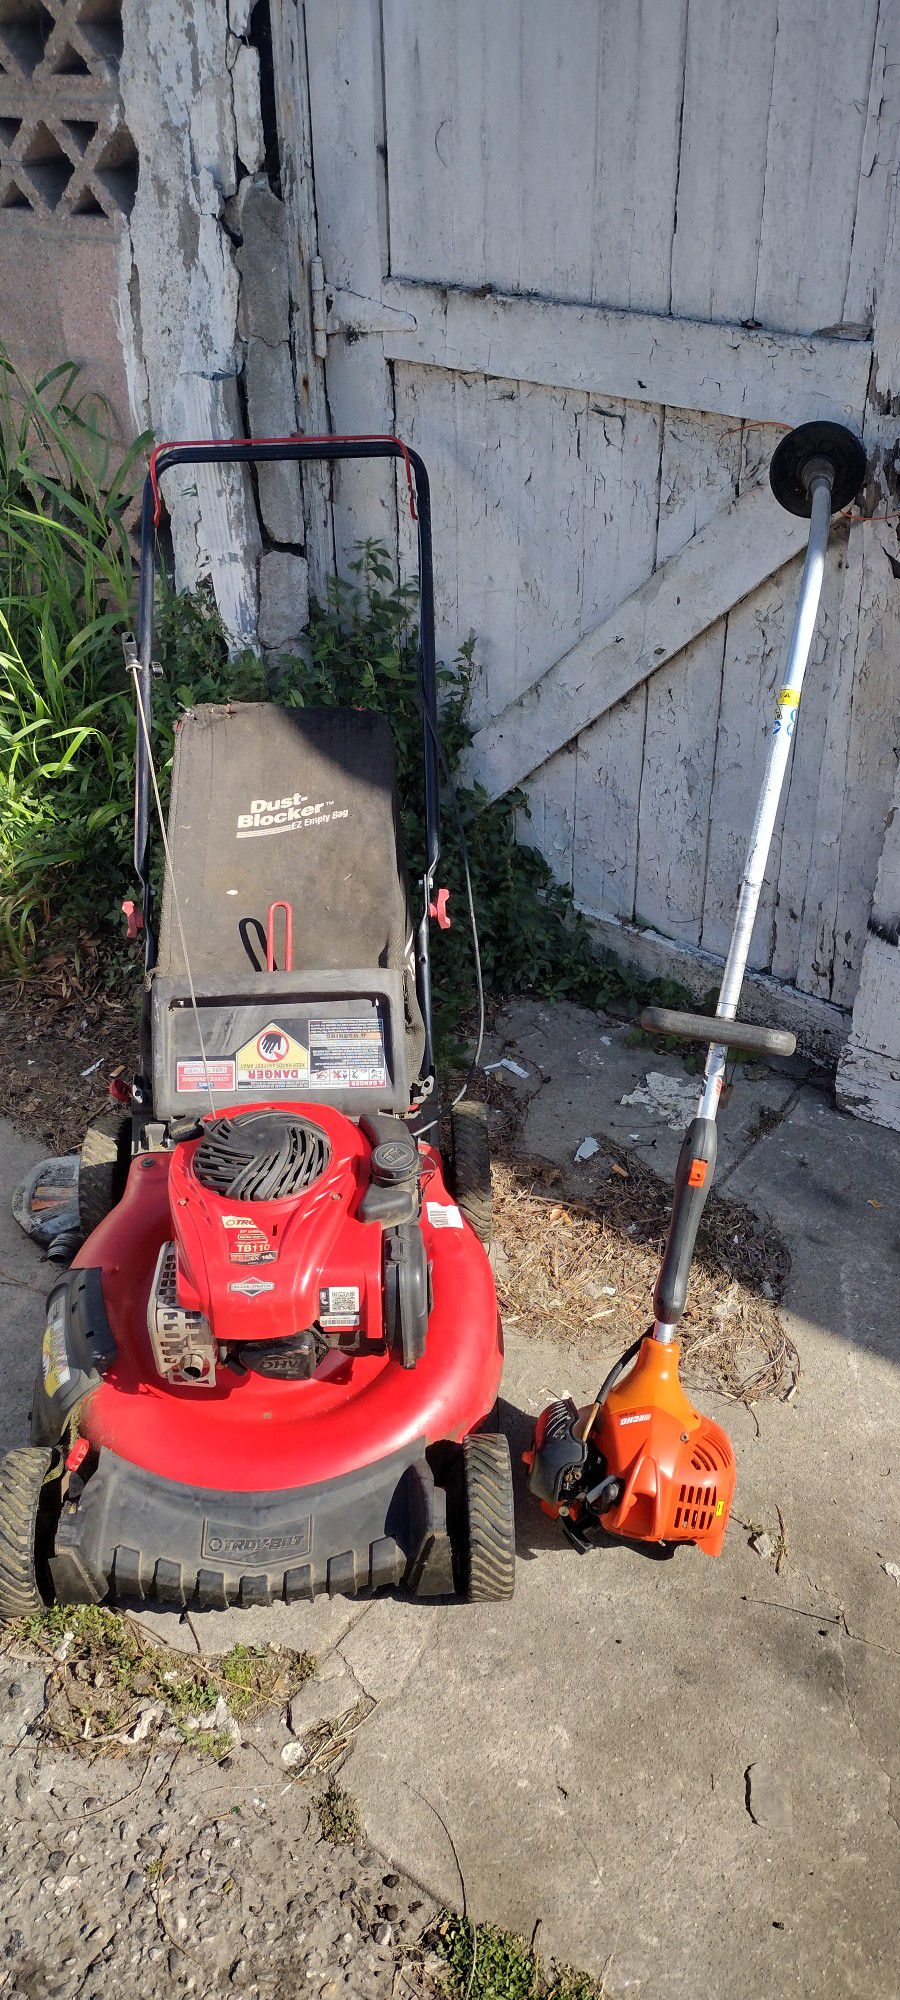 Lawn Mower And Weed Wacker